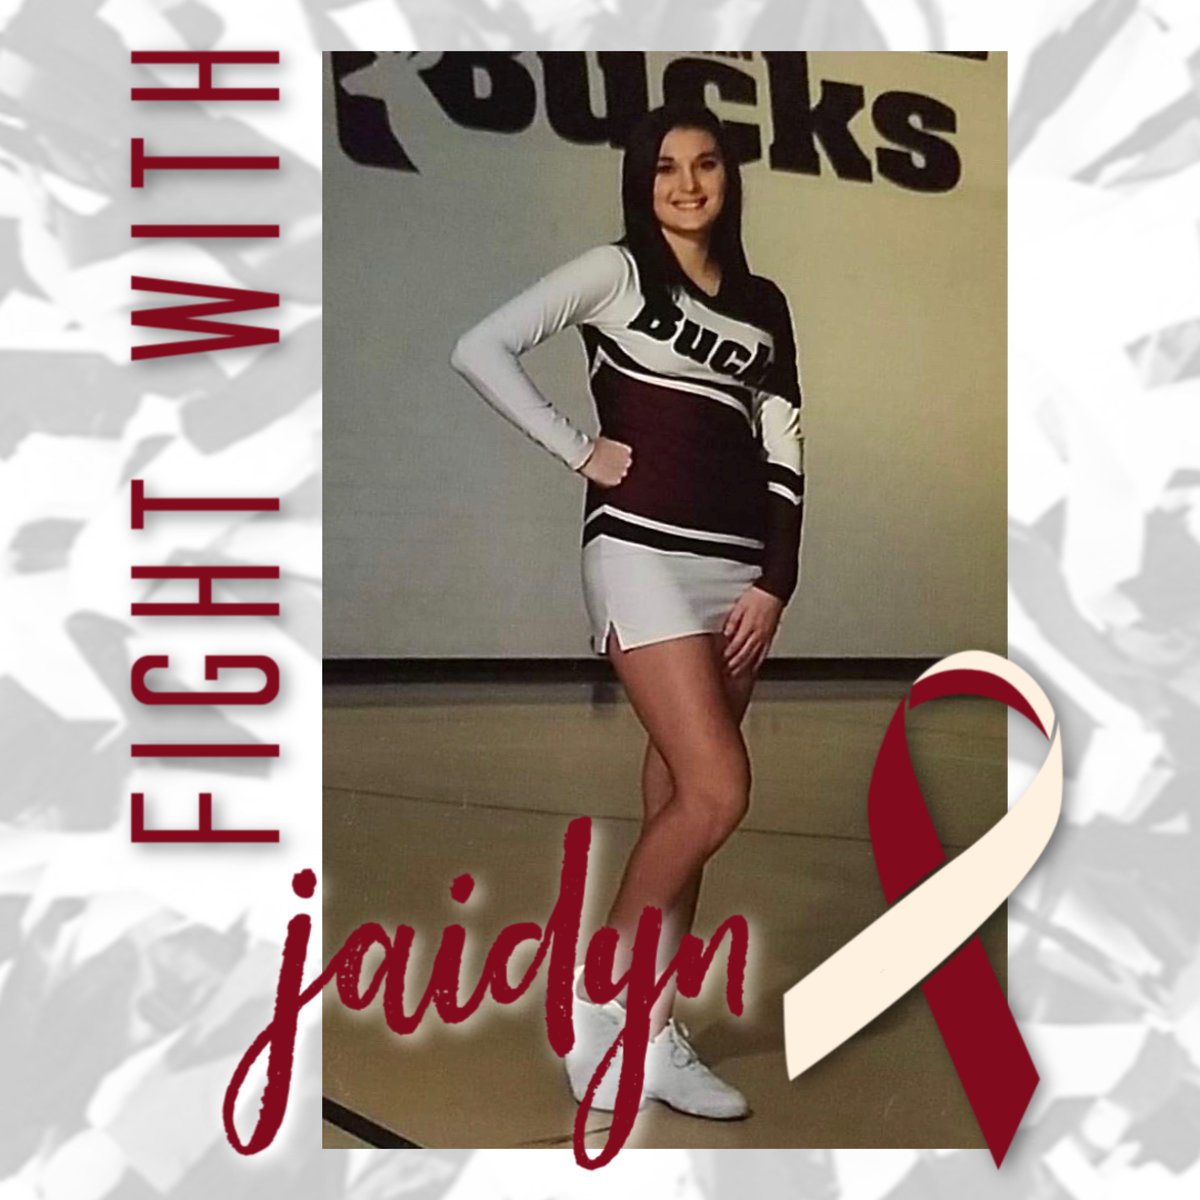 Sending our best thoughts, prayers, & wishes to our own Buchanan Buck, Jaidyn. Stay strong, fight hard, & know that Bucktown is supporting you. Mark your calendars folks, this year's Powderpuff game (Oct. 1) will be a fundraiser for Jaidyn. Be there! #Buckstrong #LaryngealCancer